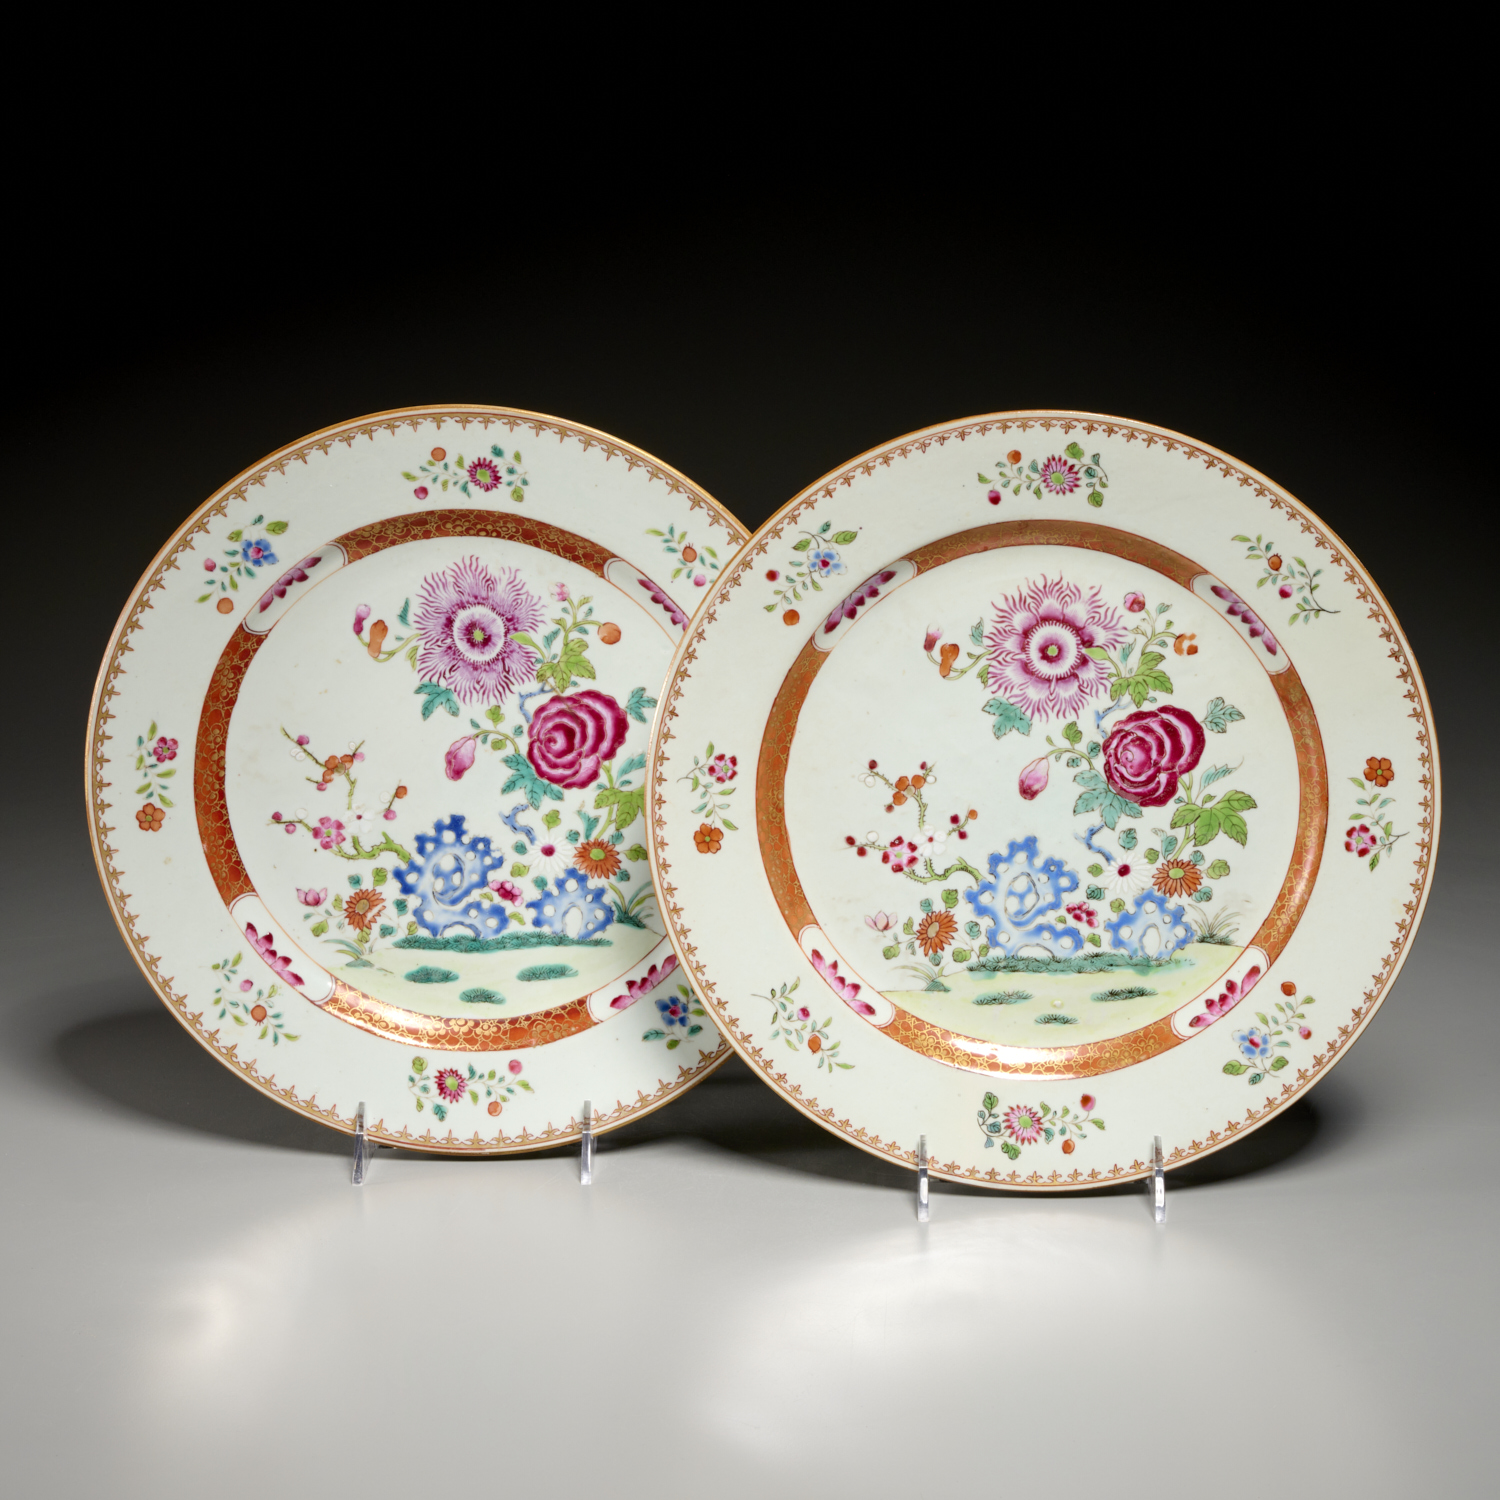 PAIR CHINESE FAMILLE ROSE CHARGERS 3b45ef